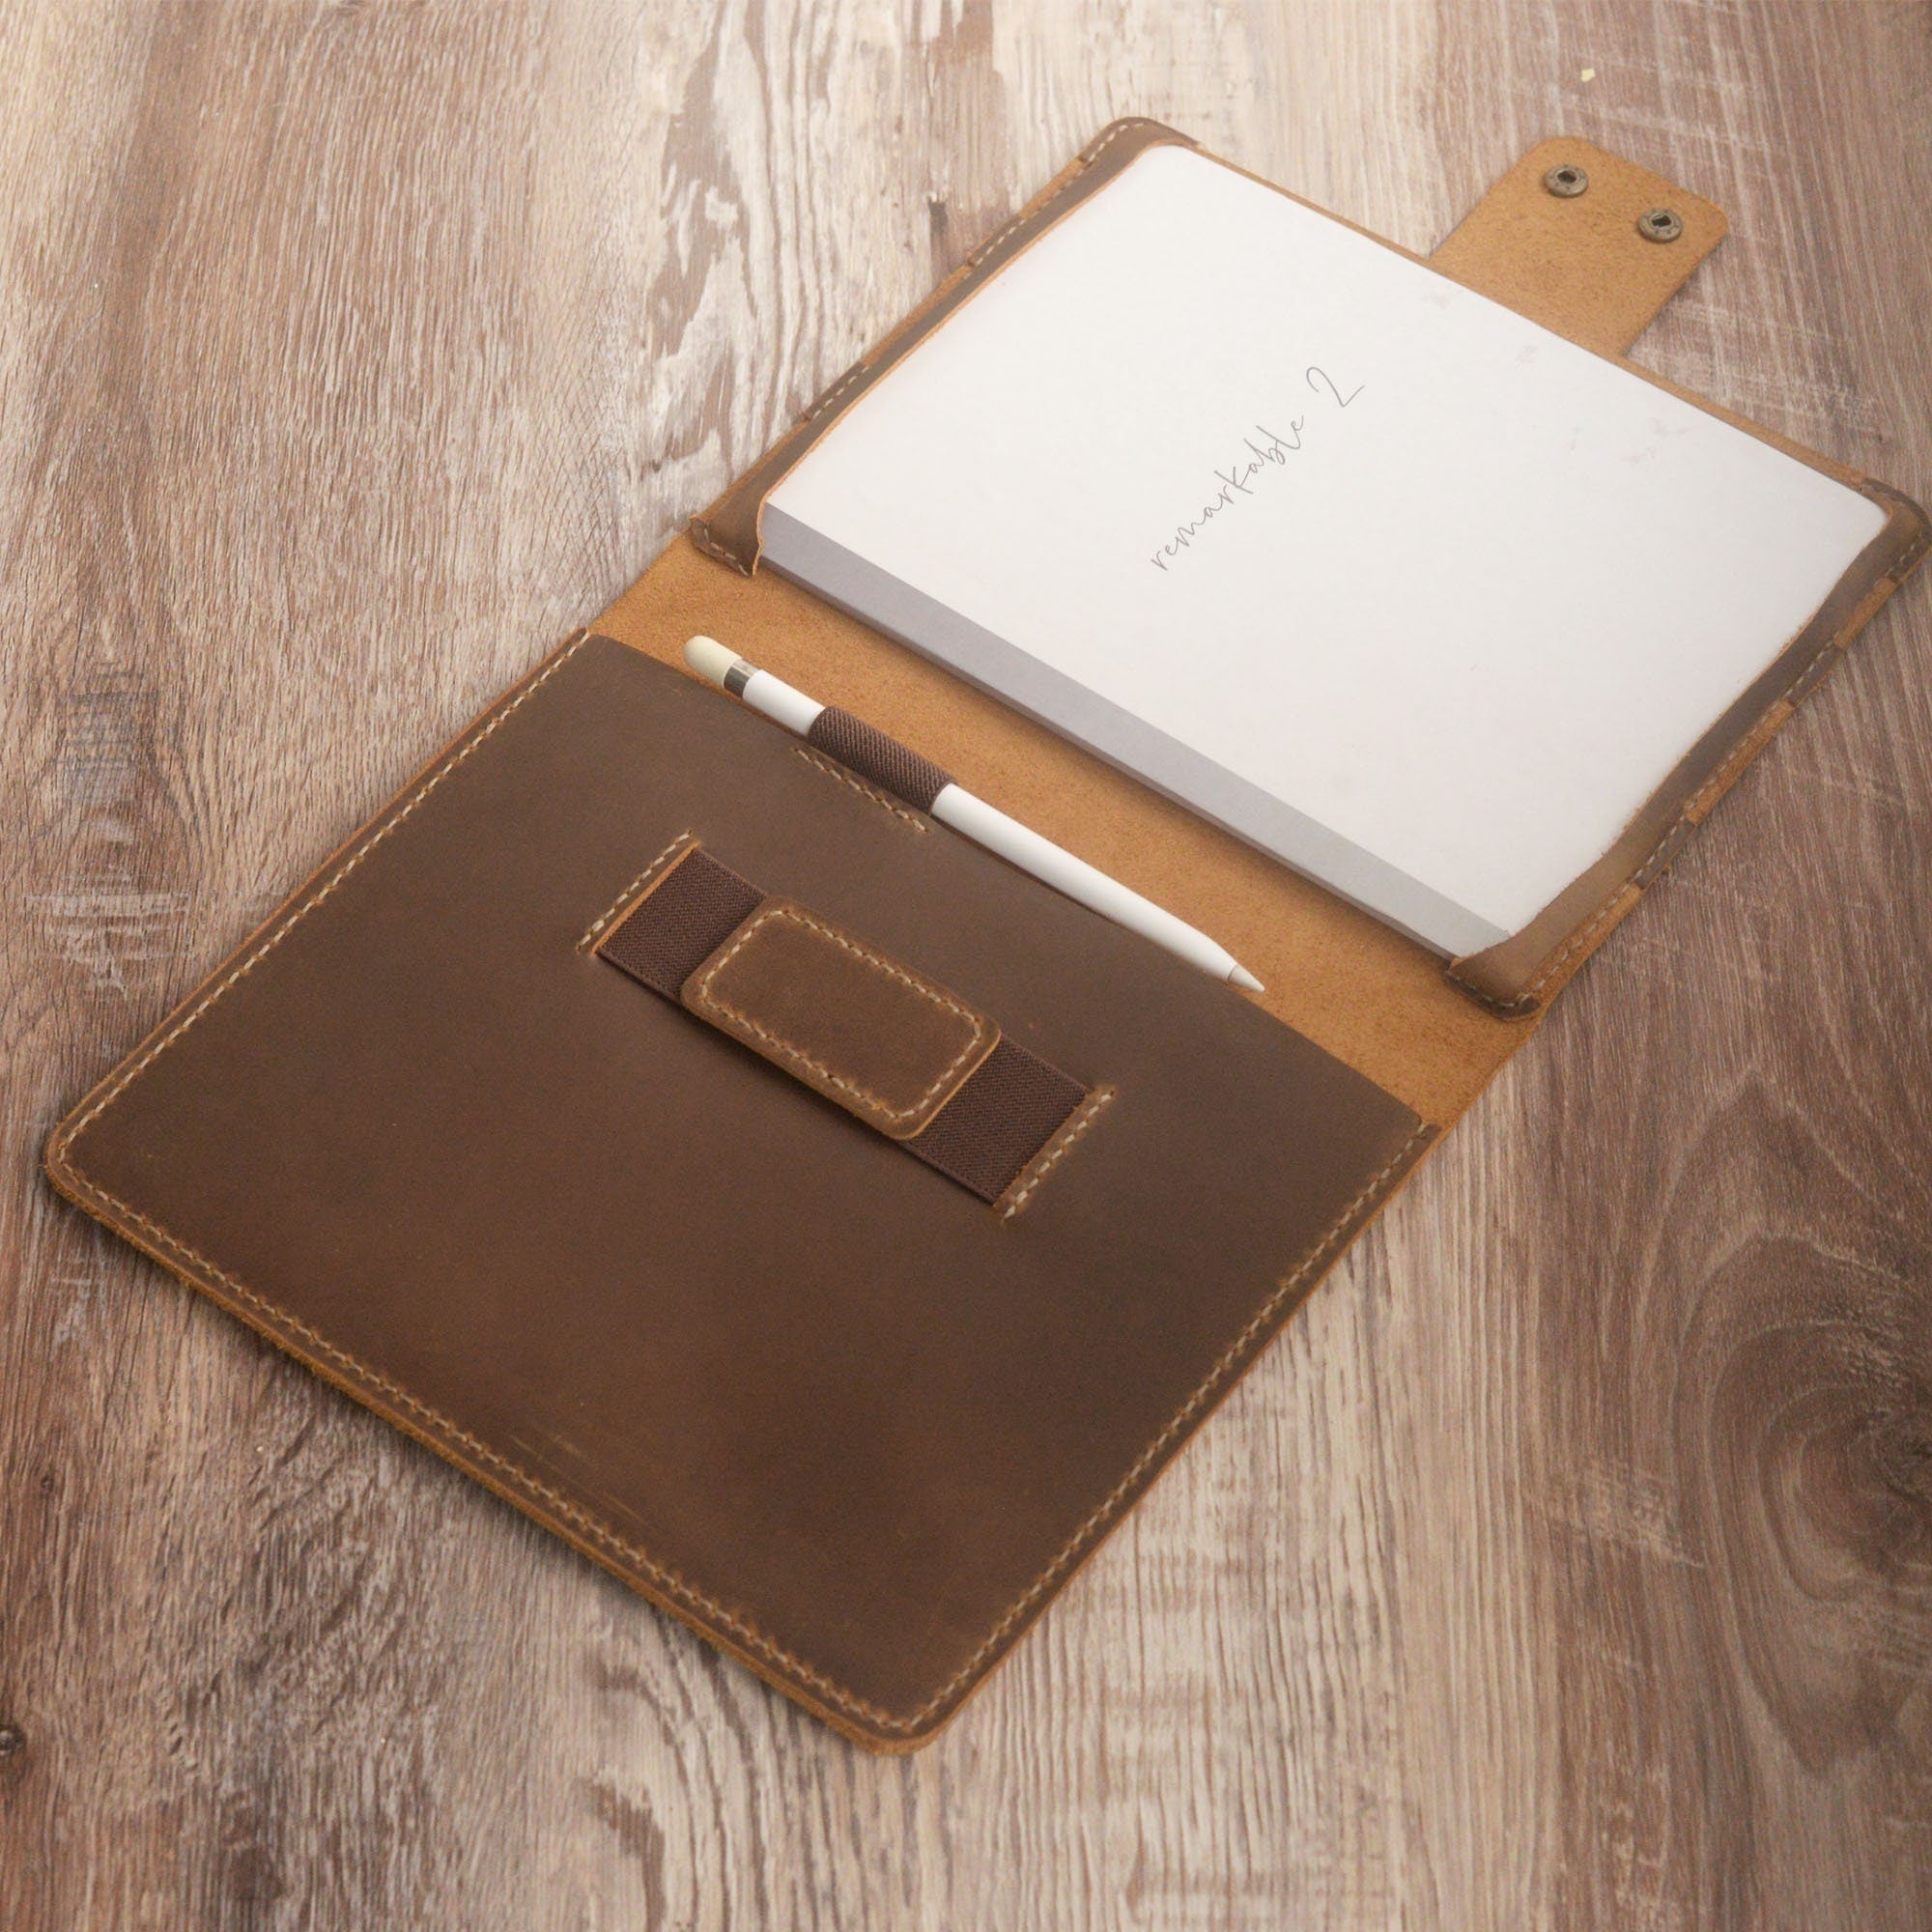 Hand and Hide Leather Tablet Case for reMarkable 2 Tablet - Hand